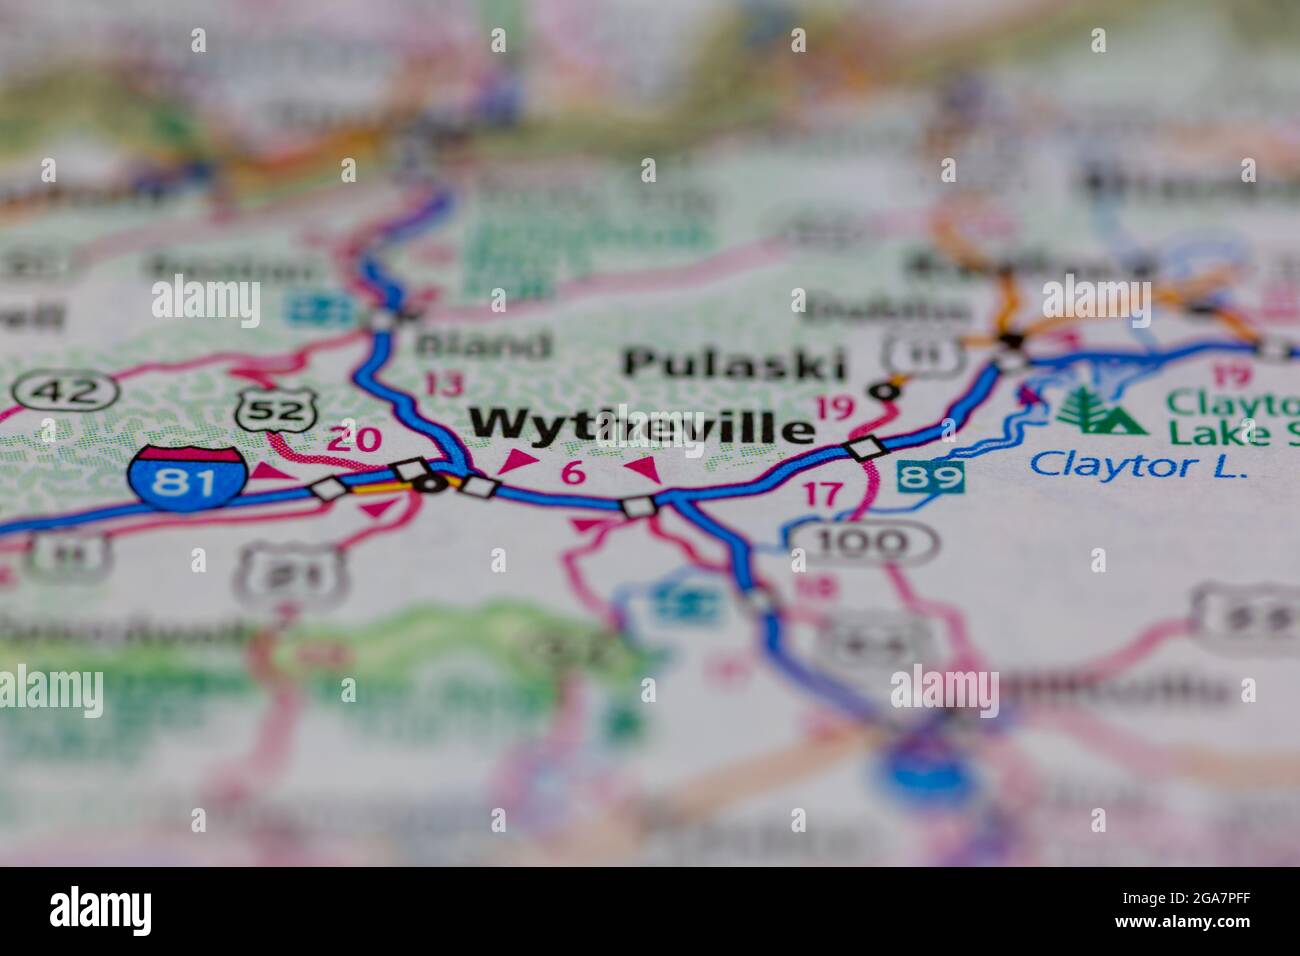 Wytheville Virginia shown on a road map or Geography map Stock Photo